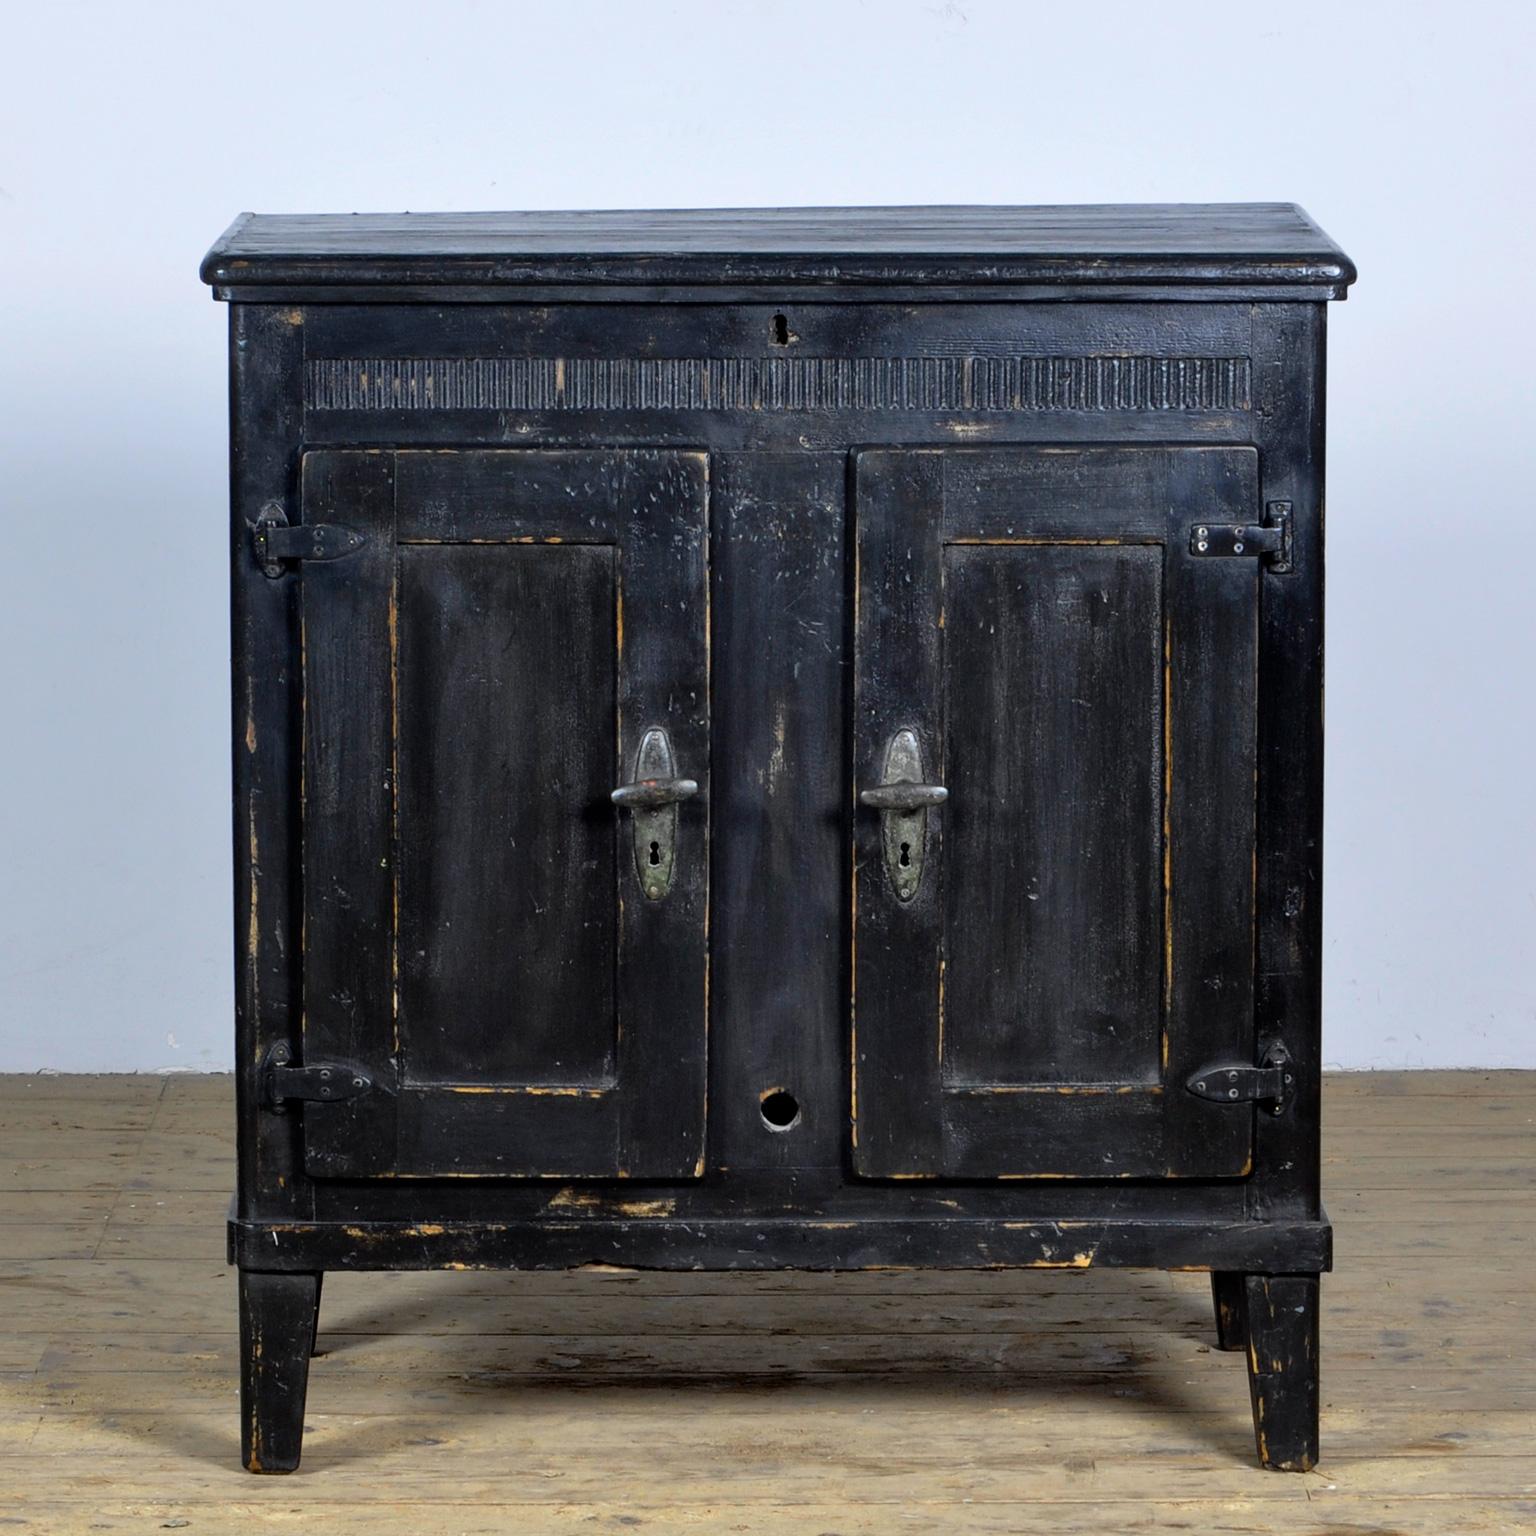 A rare precursor to our modern refrigerator and freezer, this rustic pine cabinet has a zinc-lined interior and a central compartment, accessed by lifting the lid, where the ice was kept.  It has its original hinges and locks. The cabinet comes from